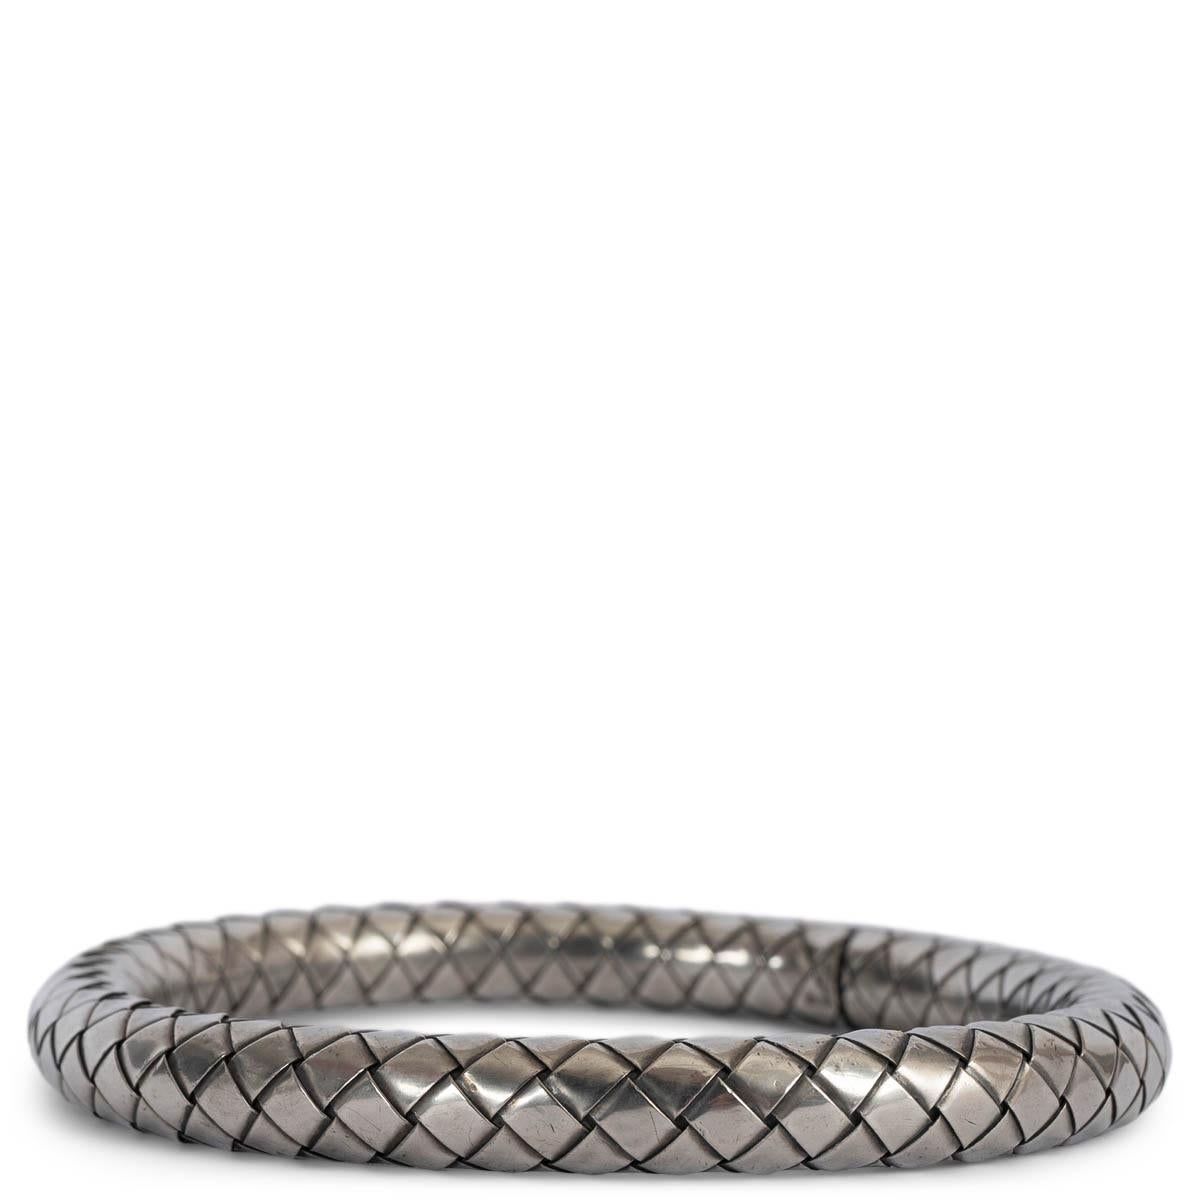 100% authentic Bottega Veneta Intrecciato bangle bracelet in antiqued sterling silver. Continuous hand woven design. Has been worn and is in excellent condition. 

Measurements
Width	0.8cm (0.3in)
Circumference	19cm (7.4in)
Hardware	Antique Sterling